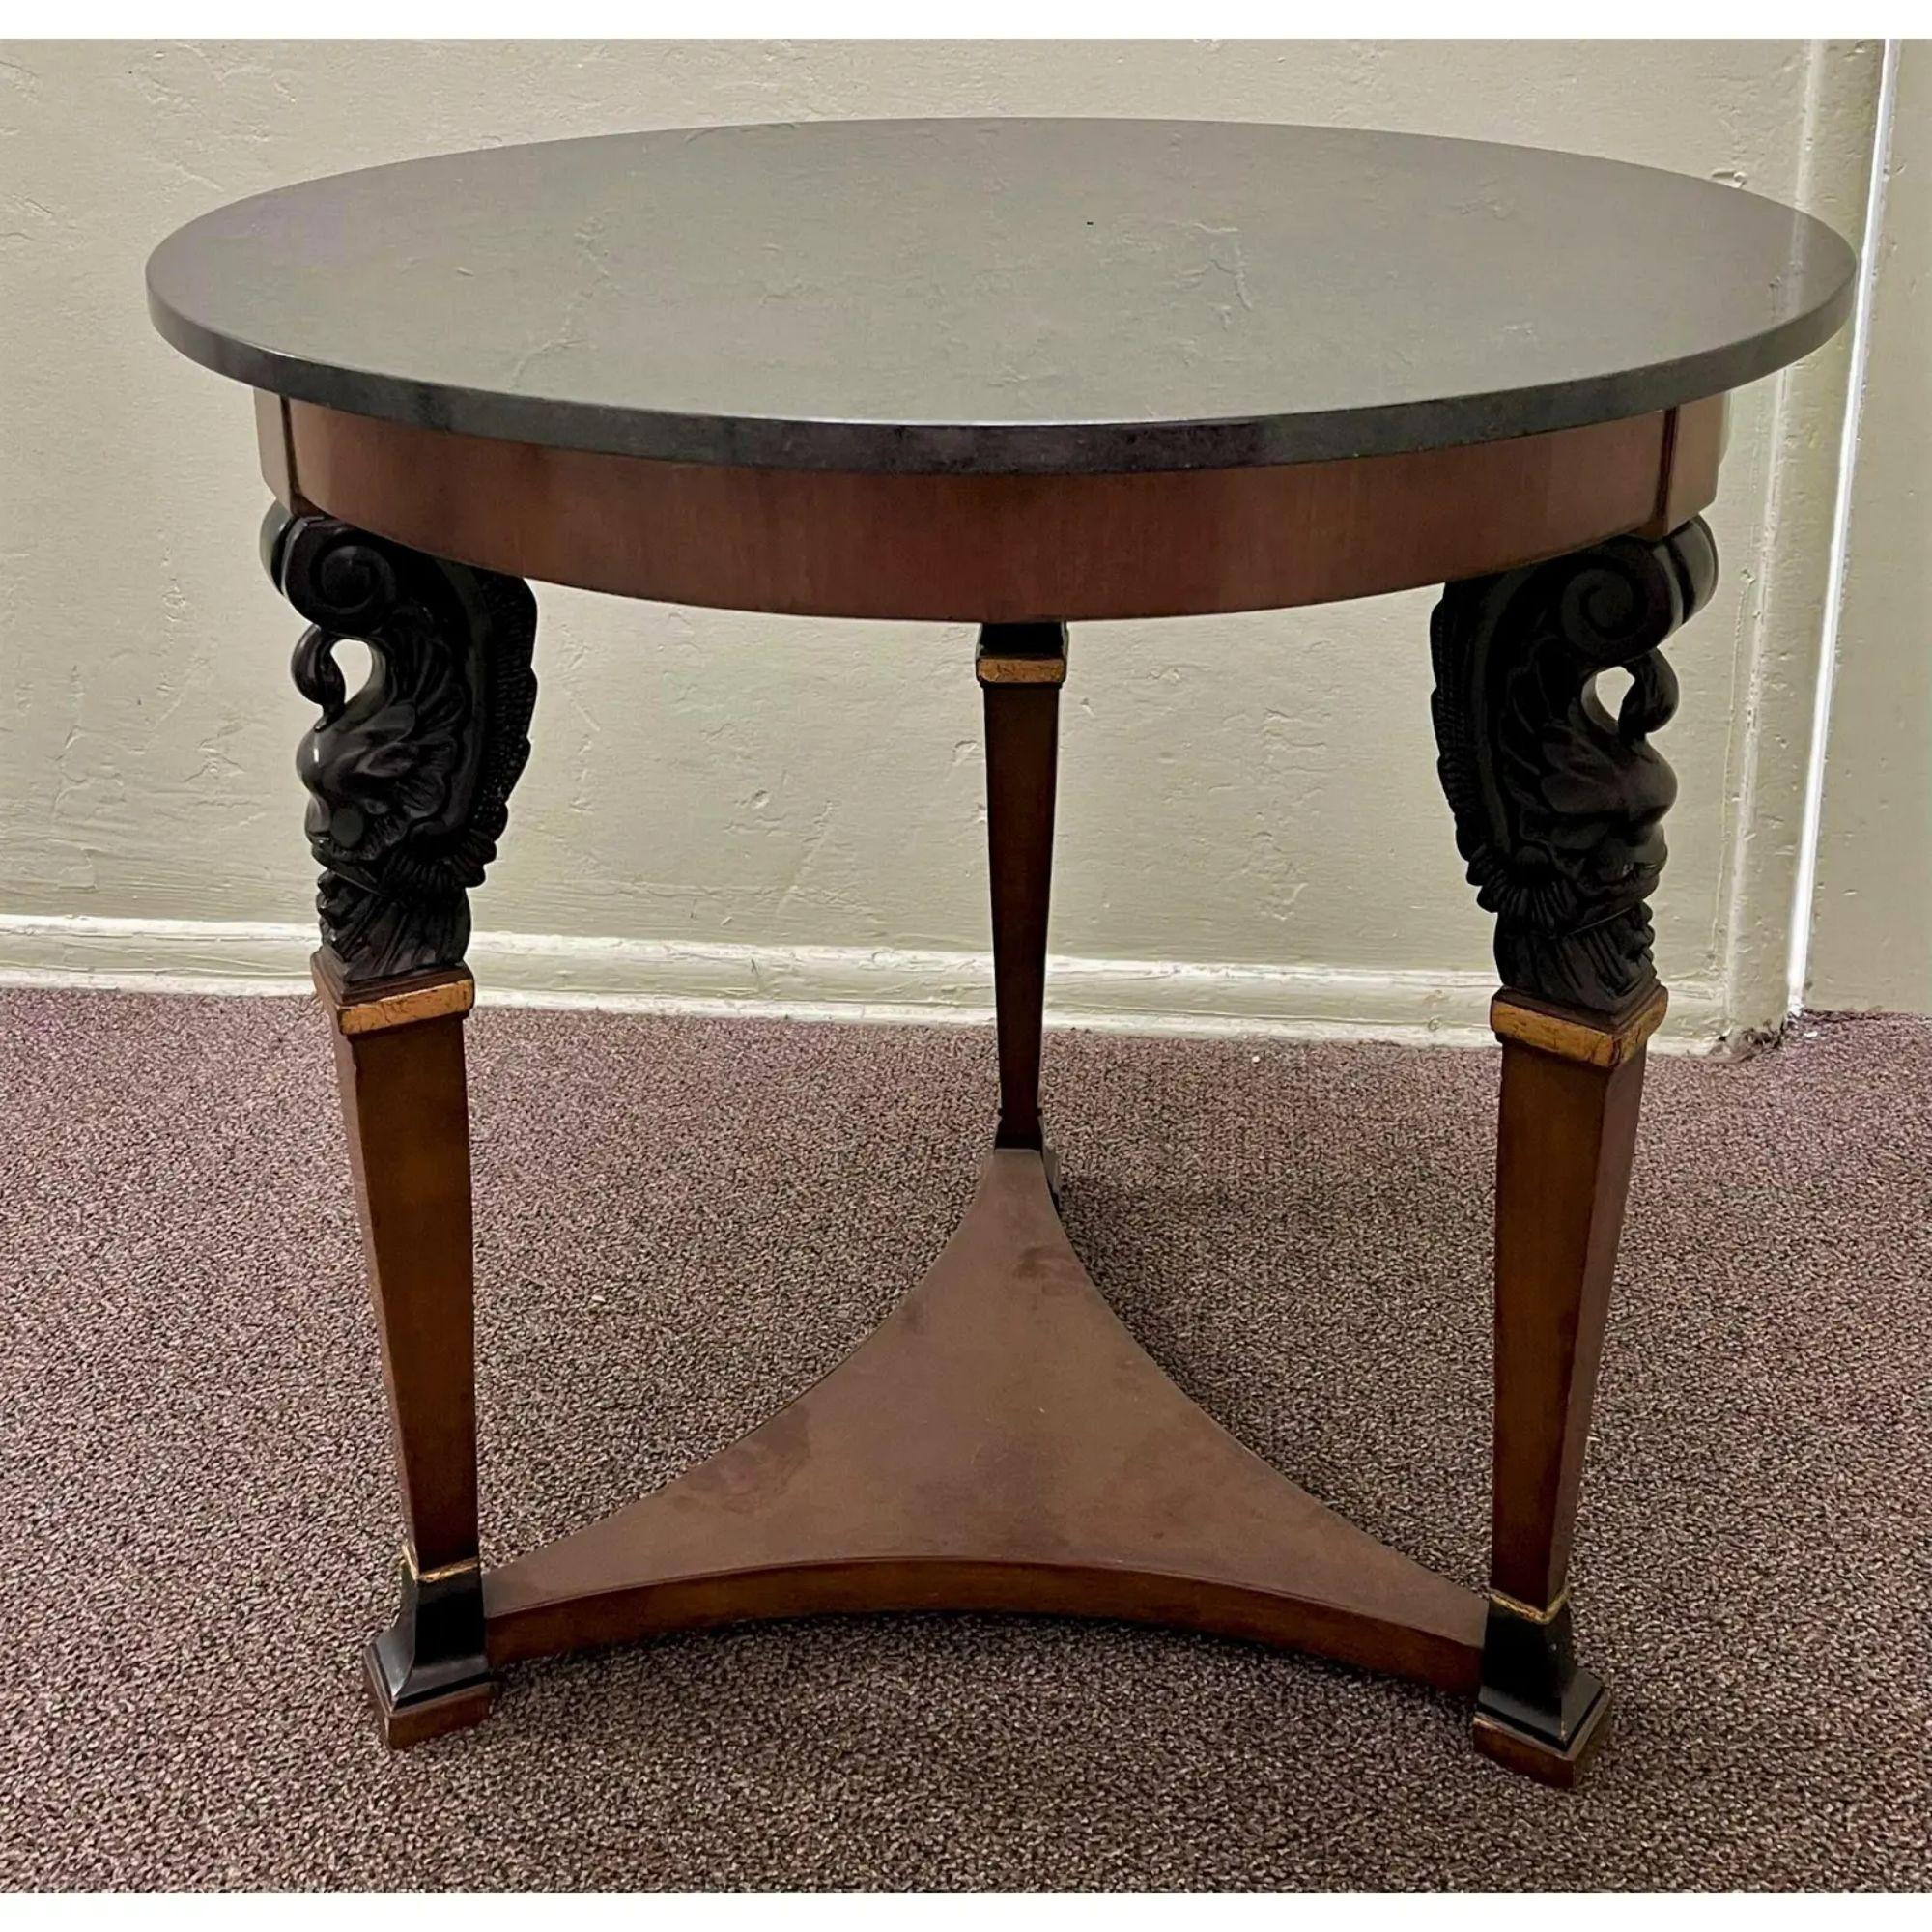 20th Century Directoire Style Charles Pollock for William Switzer Marble Top Table For Sale